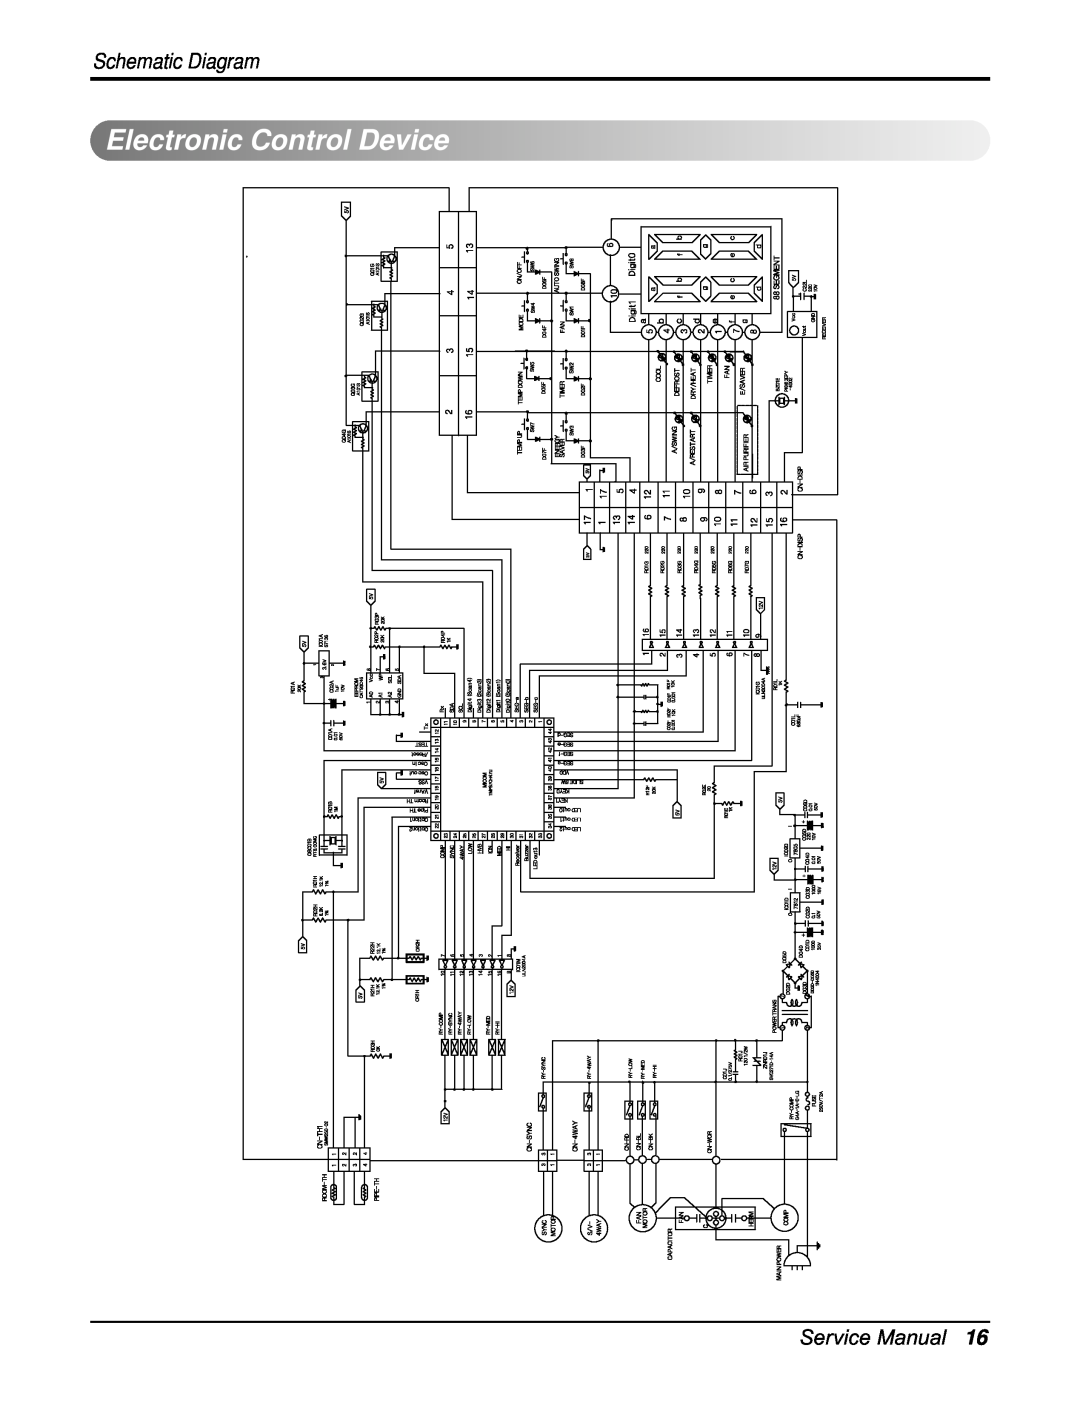 Friedrich CP06F10, CP08F10 manual ElectronicControlDevice, Schematic Diagram 